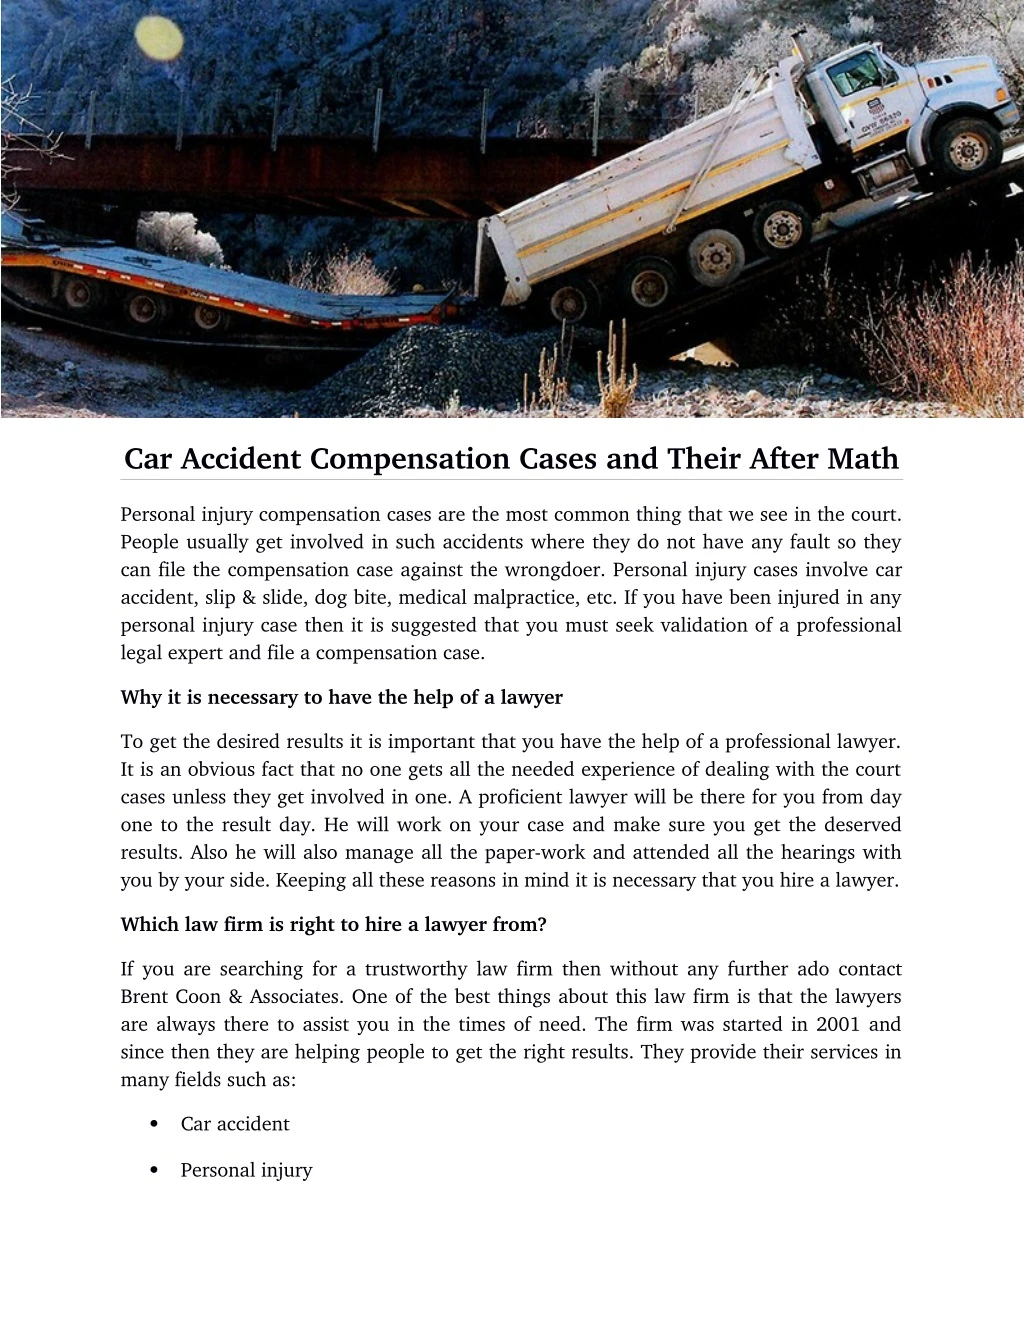 car accident compensation cases and their after